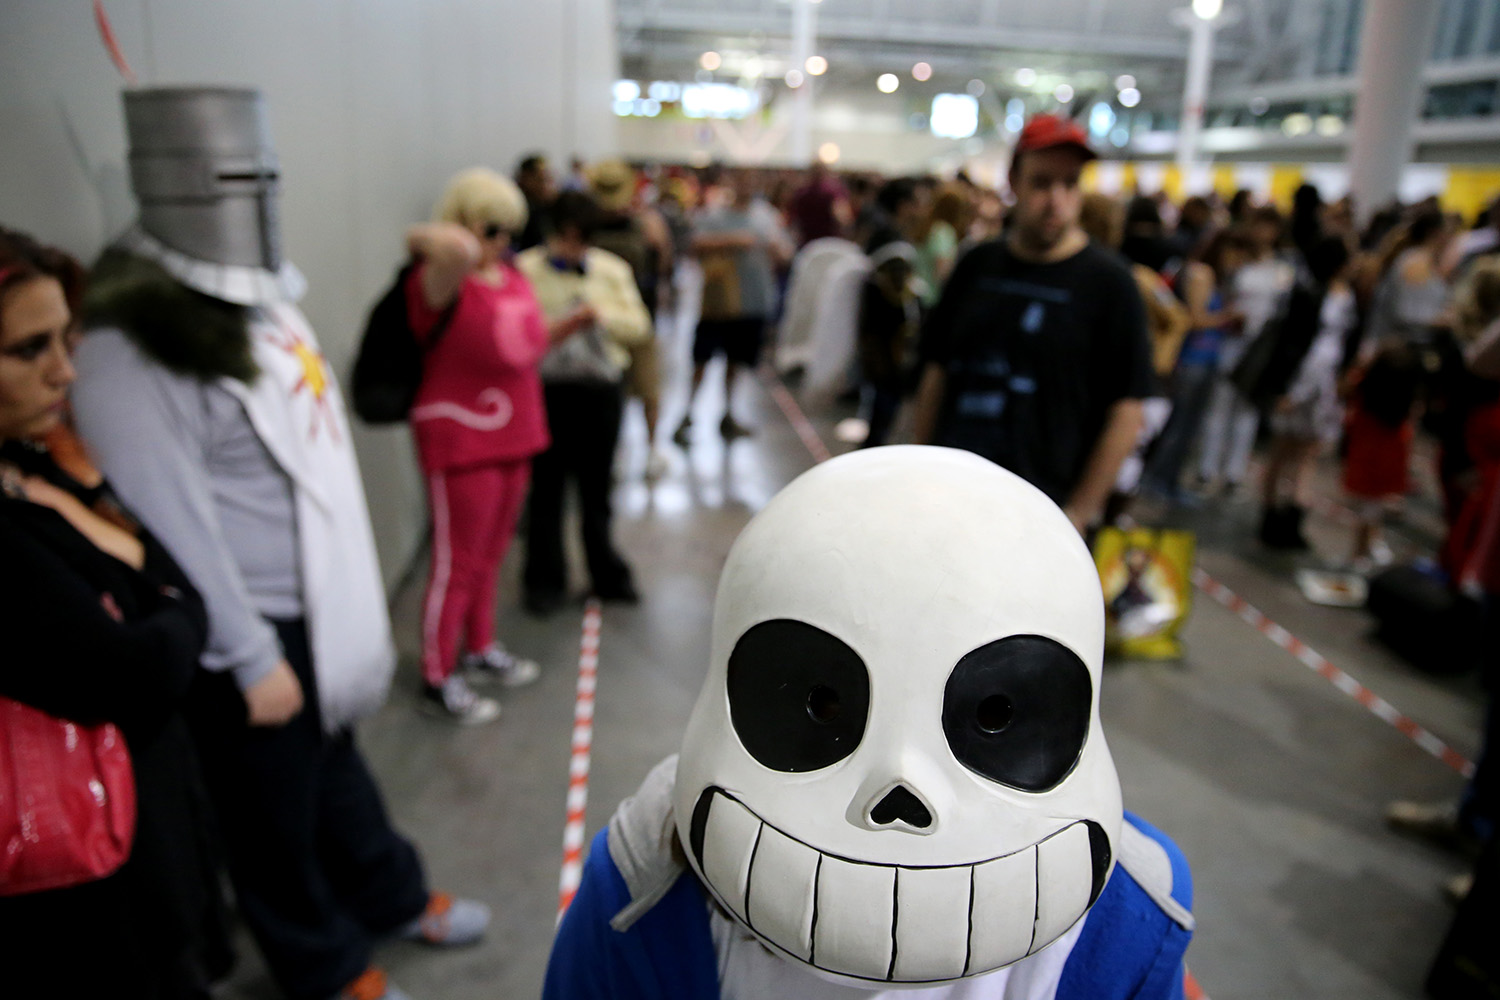 A young teen dressed as Sans, an 'Undertale' character, at Boston Comic Con in 2017